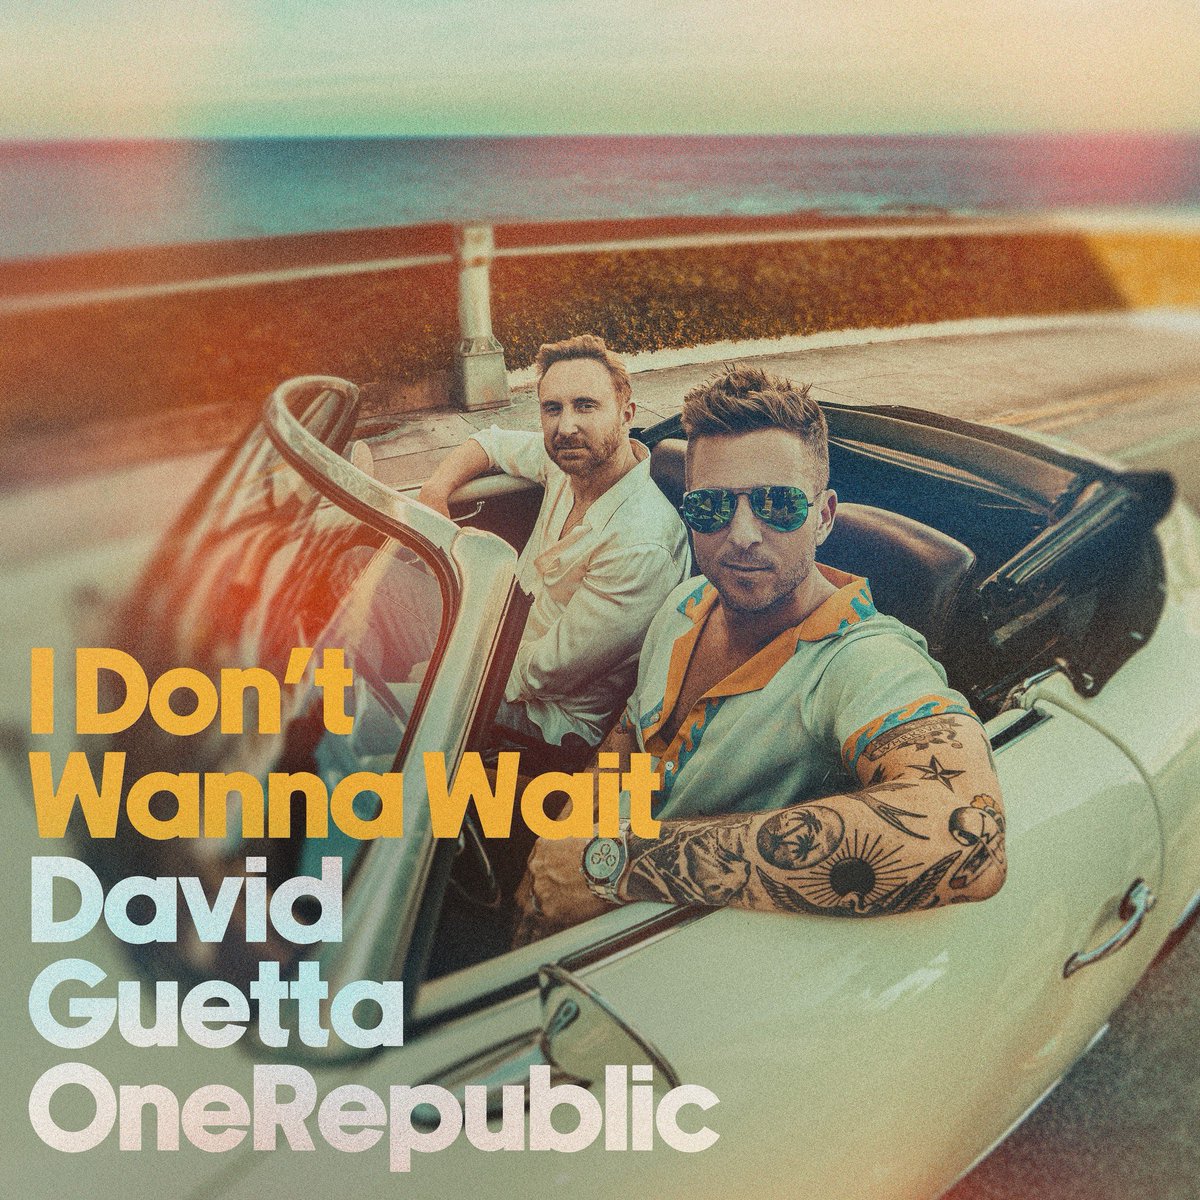 The summer has never been so close ☀️⛱️🏝️ It’s time to release our summer anthem together with @OneRepublic!!! ‘I Don’t Wanna Wait’ is coming tomorrow 🙌🏼🙌🏼🙌🏼